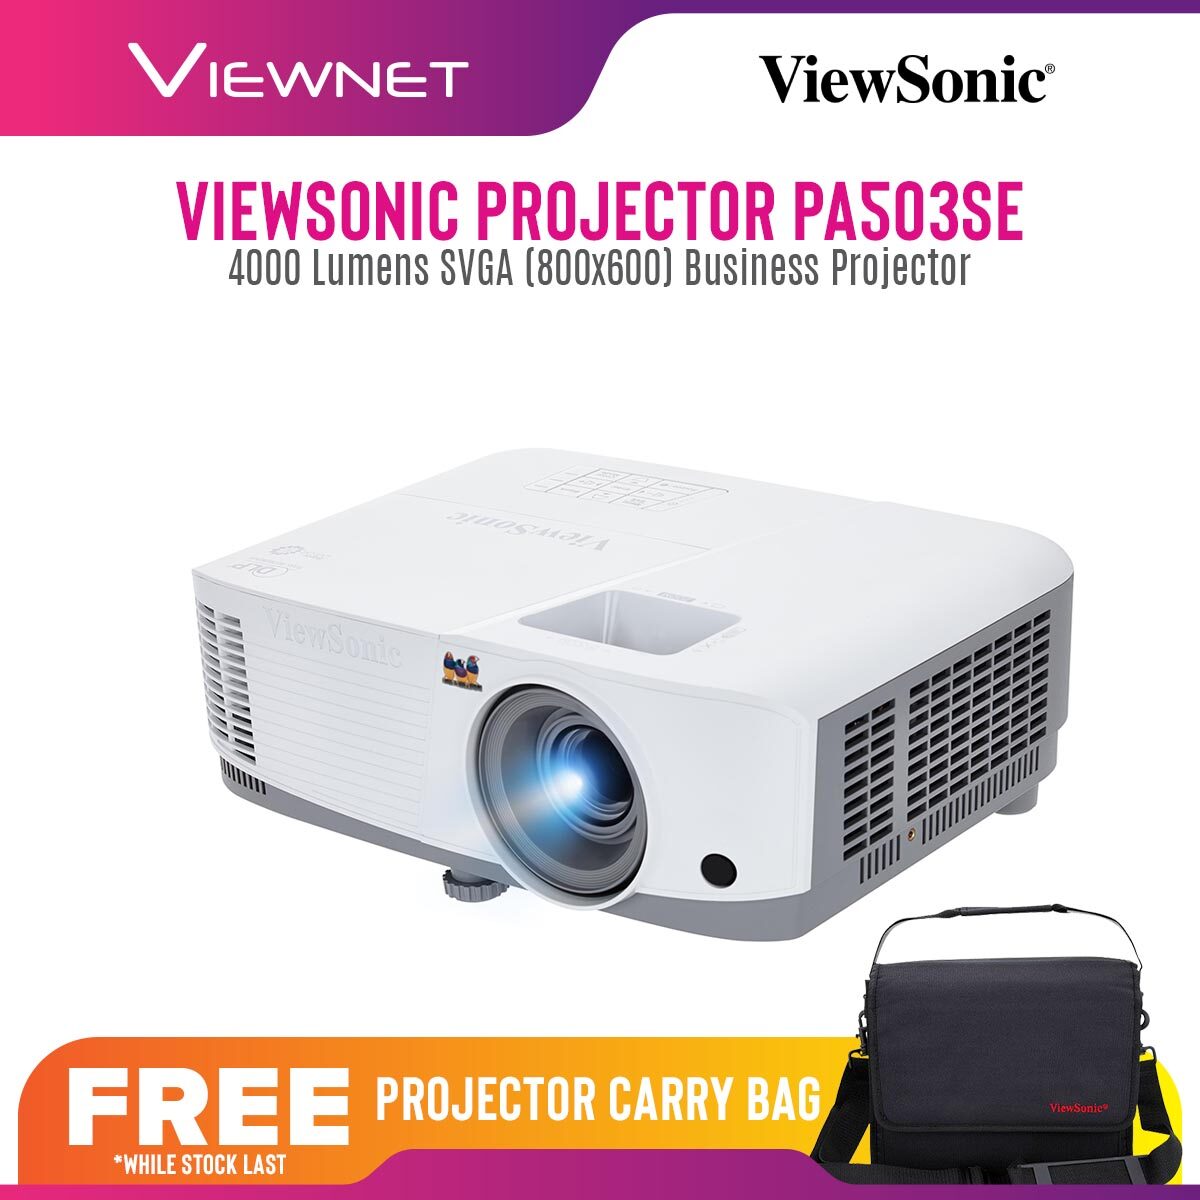 ViewSonic Projector PA503SE with SVGA Resolution (800 x 600), 4000 Lumens,15000 Hours Lamp Life in Eco Mode